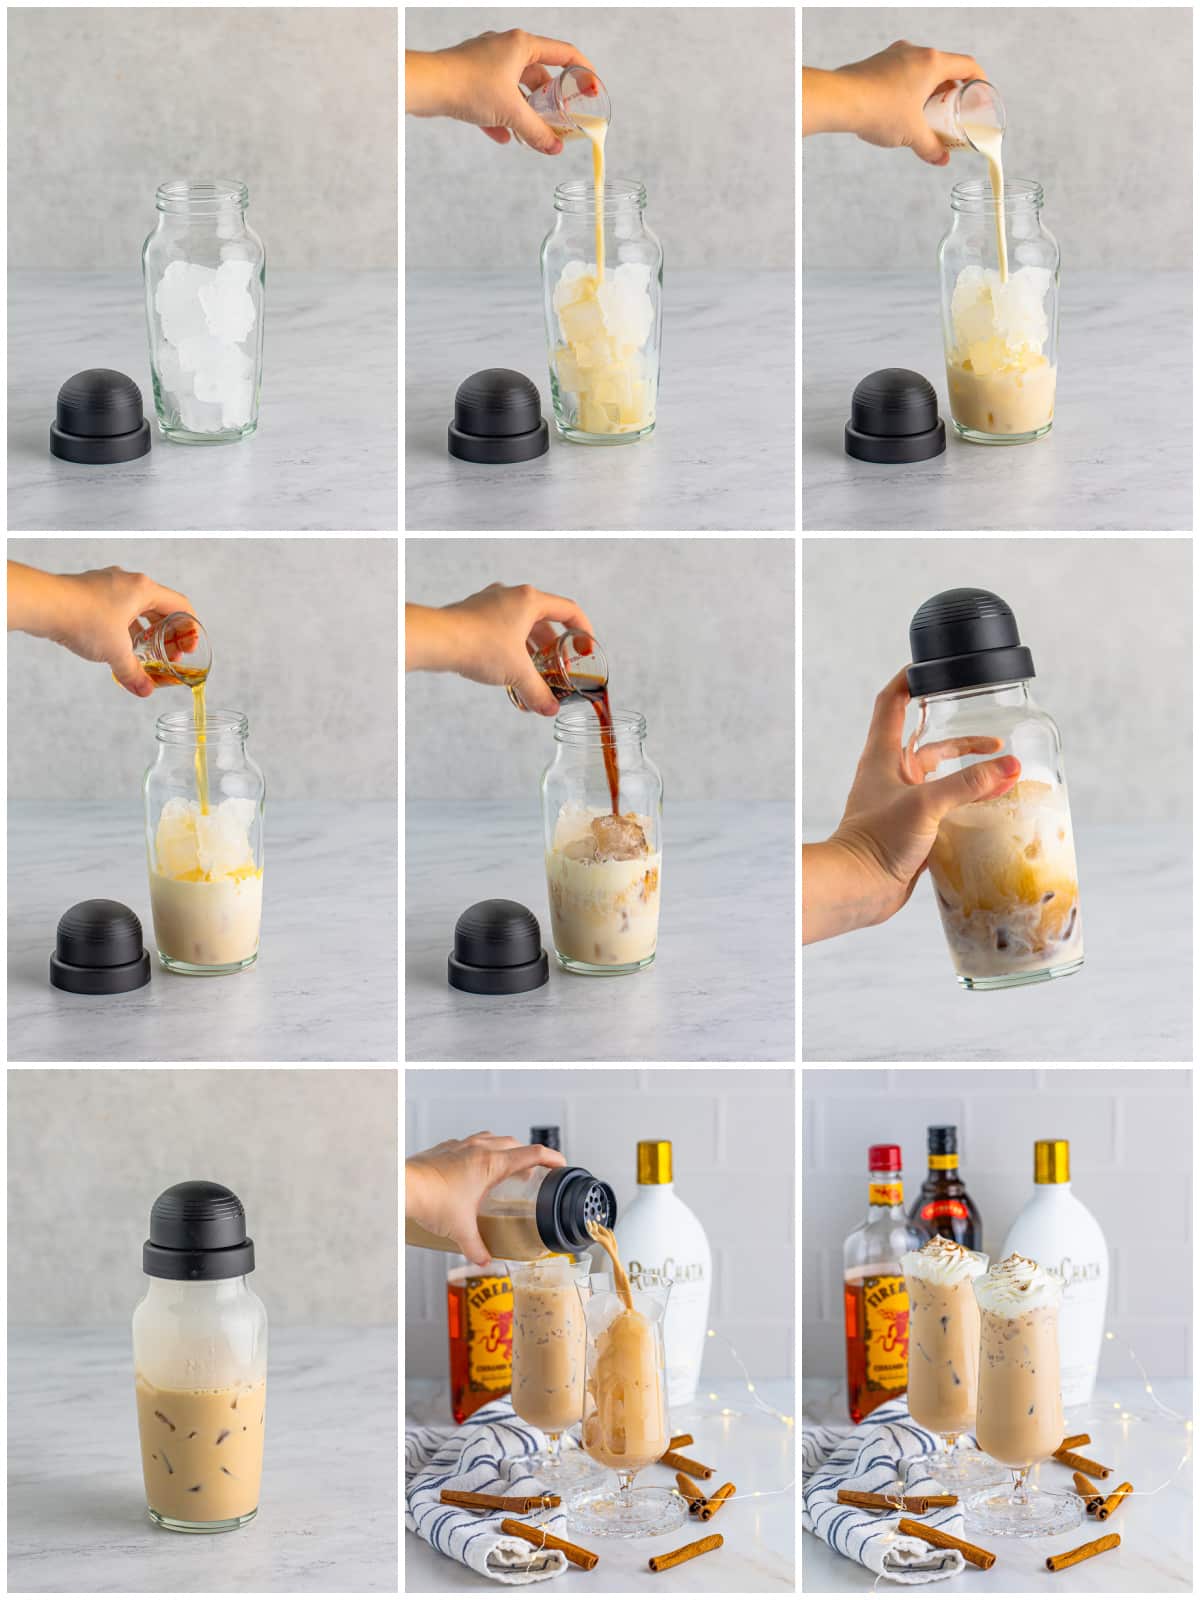 Step by step photos on how to make a Cinnamon Roll Cocktail.